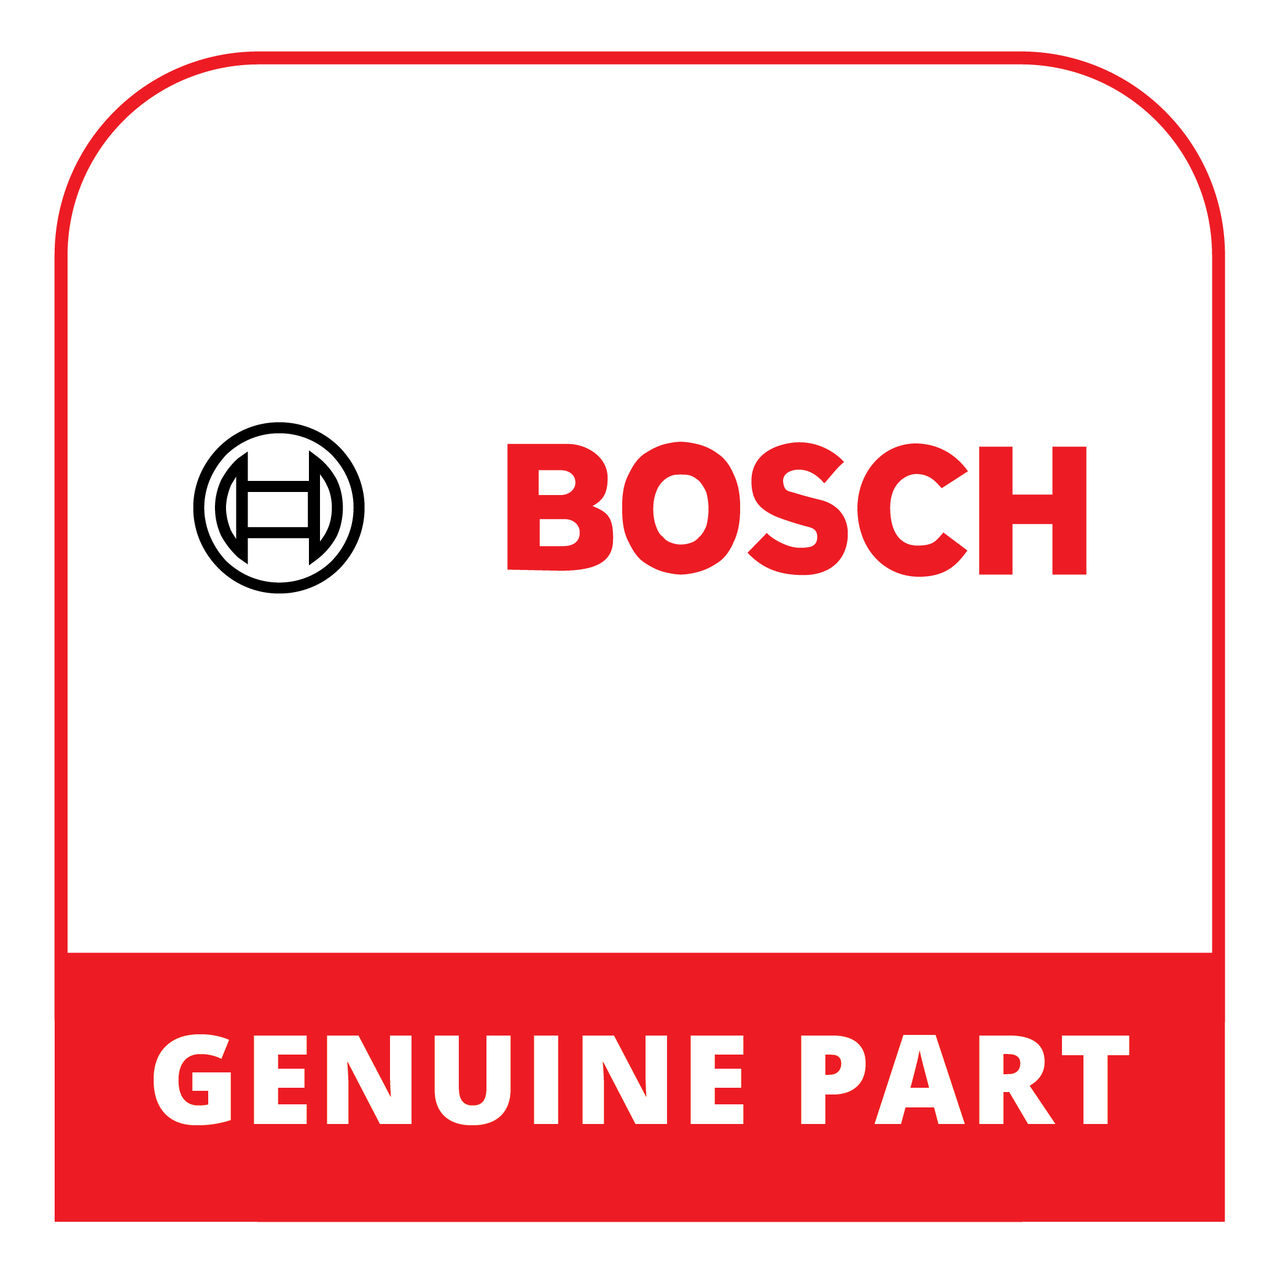 Bosch (Thermador) 18065684 - Instruction Manual - Genuine Bosch (Thermador) Part